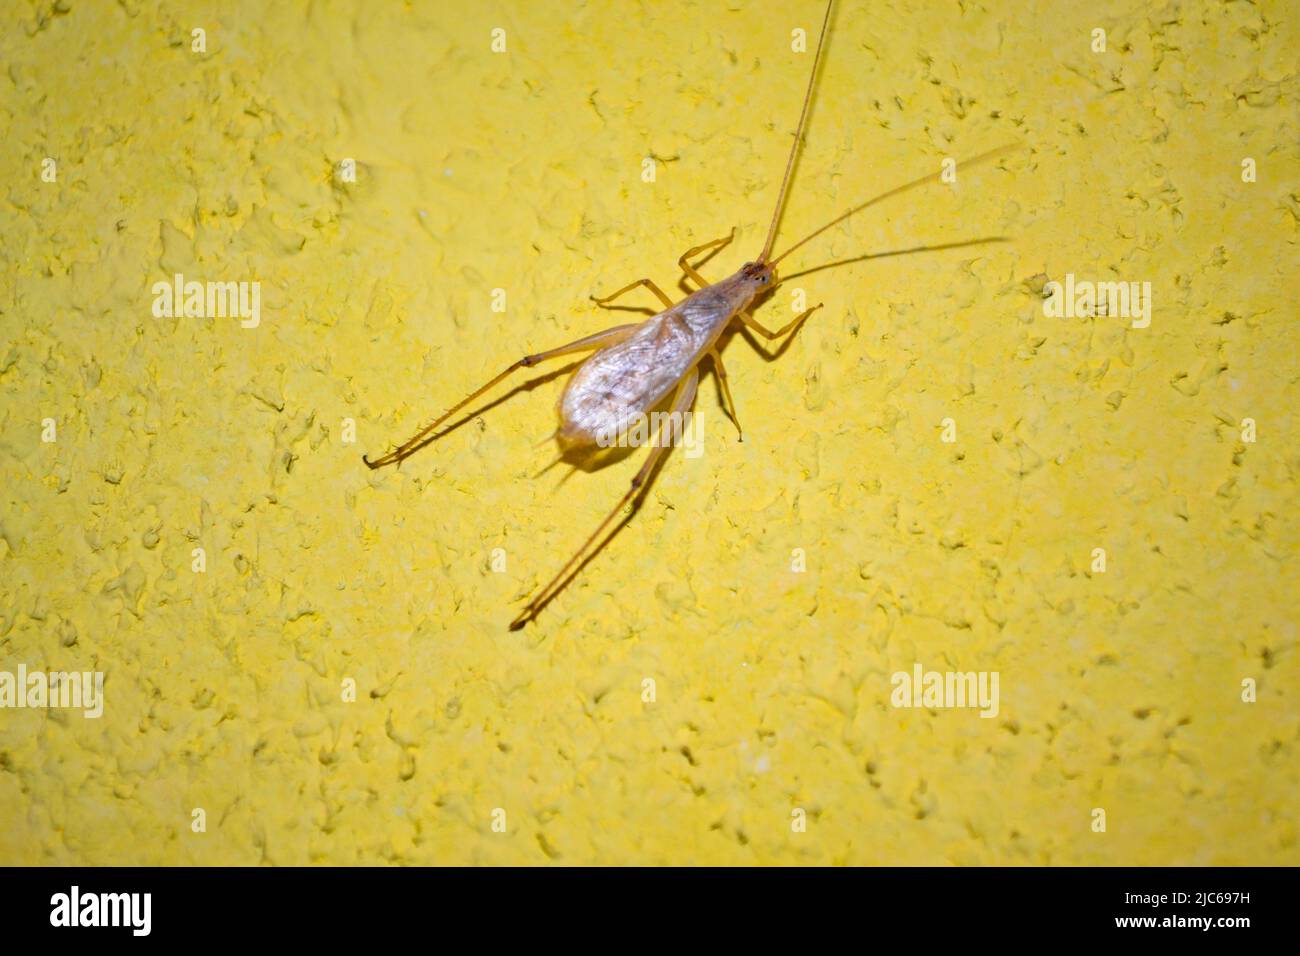 Acheta domesticus, commonly called the house cricket, on yellow wall.Male crickets primarily use their chirping ability to create mating calls. Stock Photo